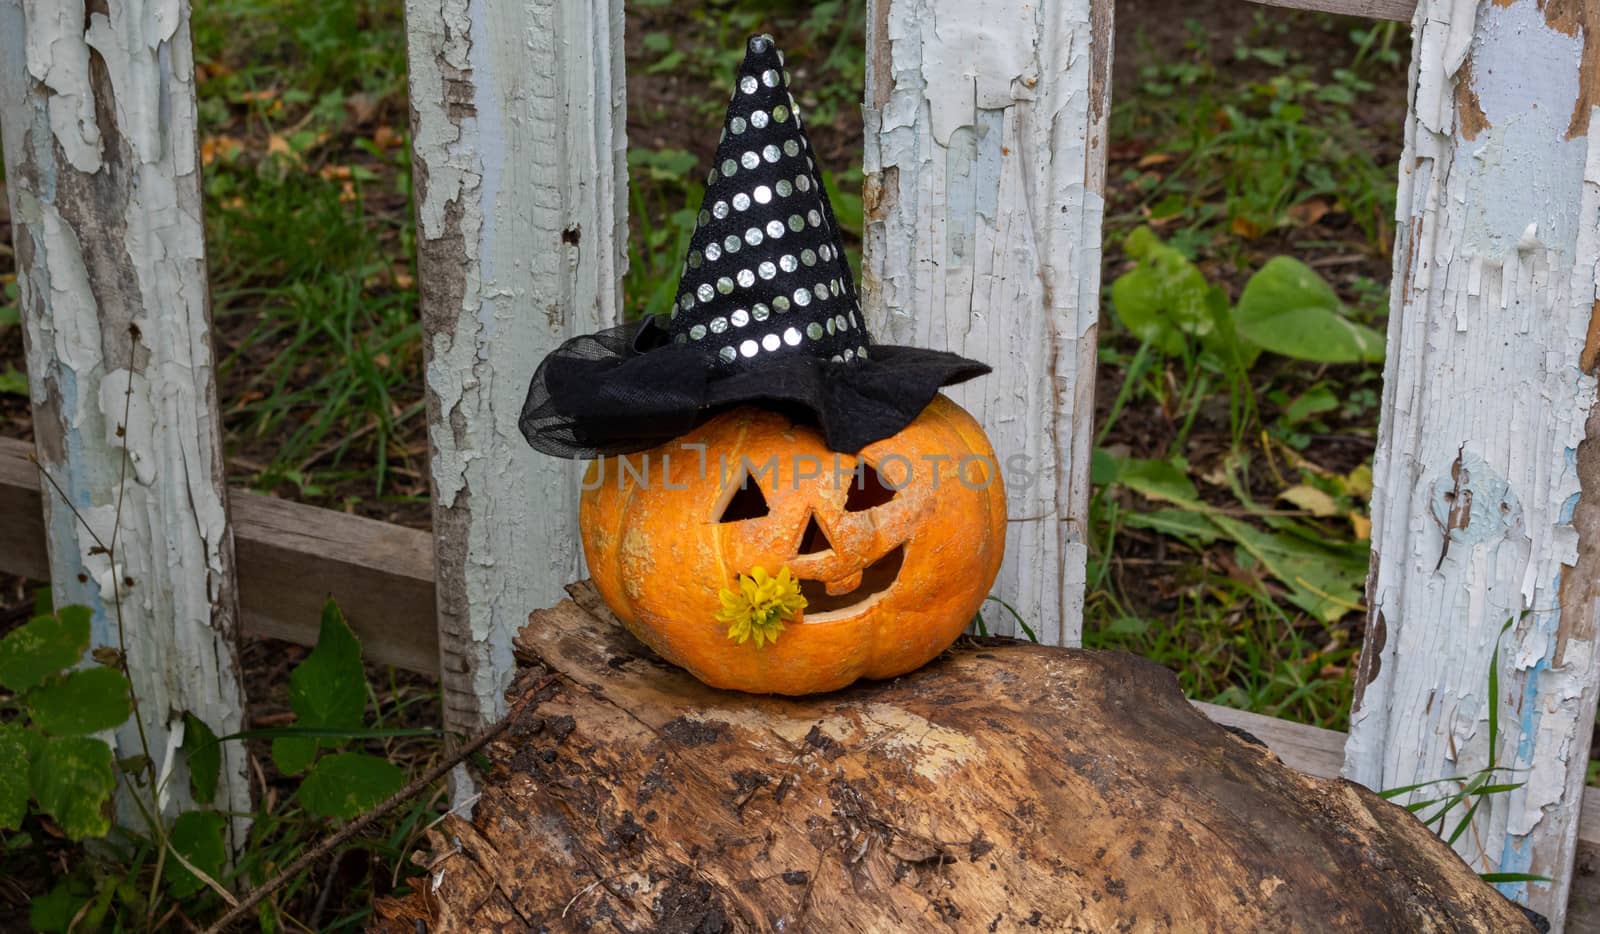 A cheerful pumpkin in a Witch's hat is sitting on a stump near the fence.The Concept Of Halloween by lapushka62